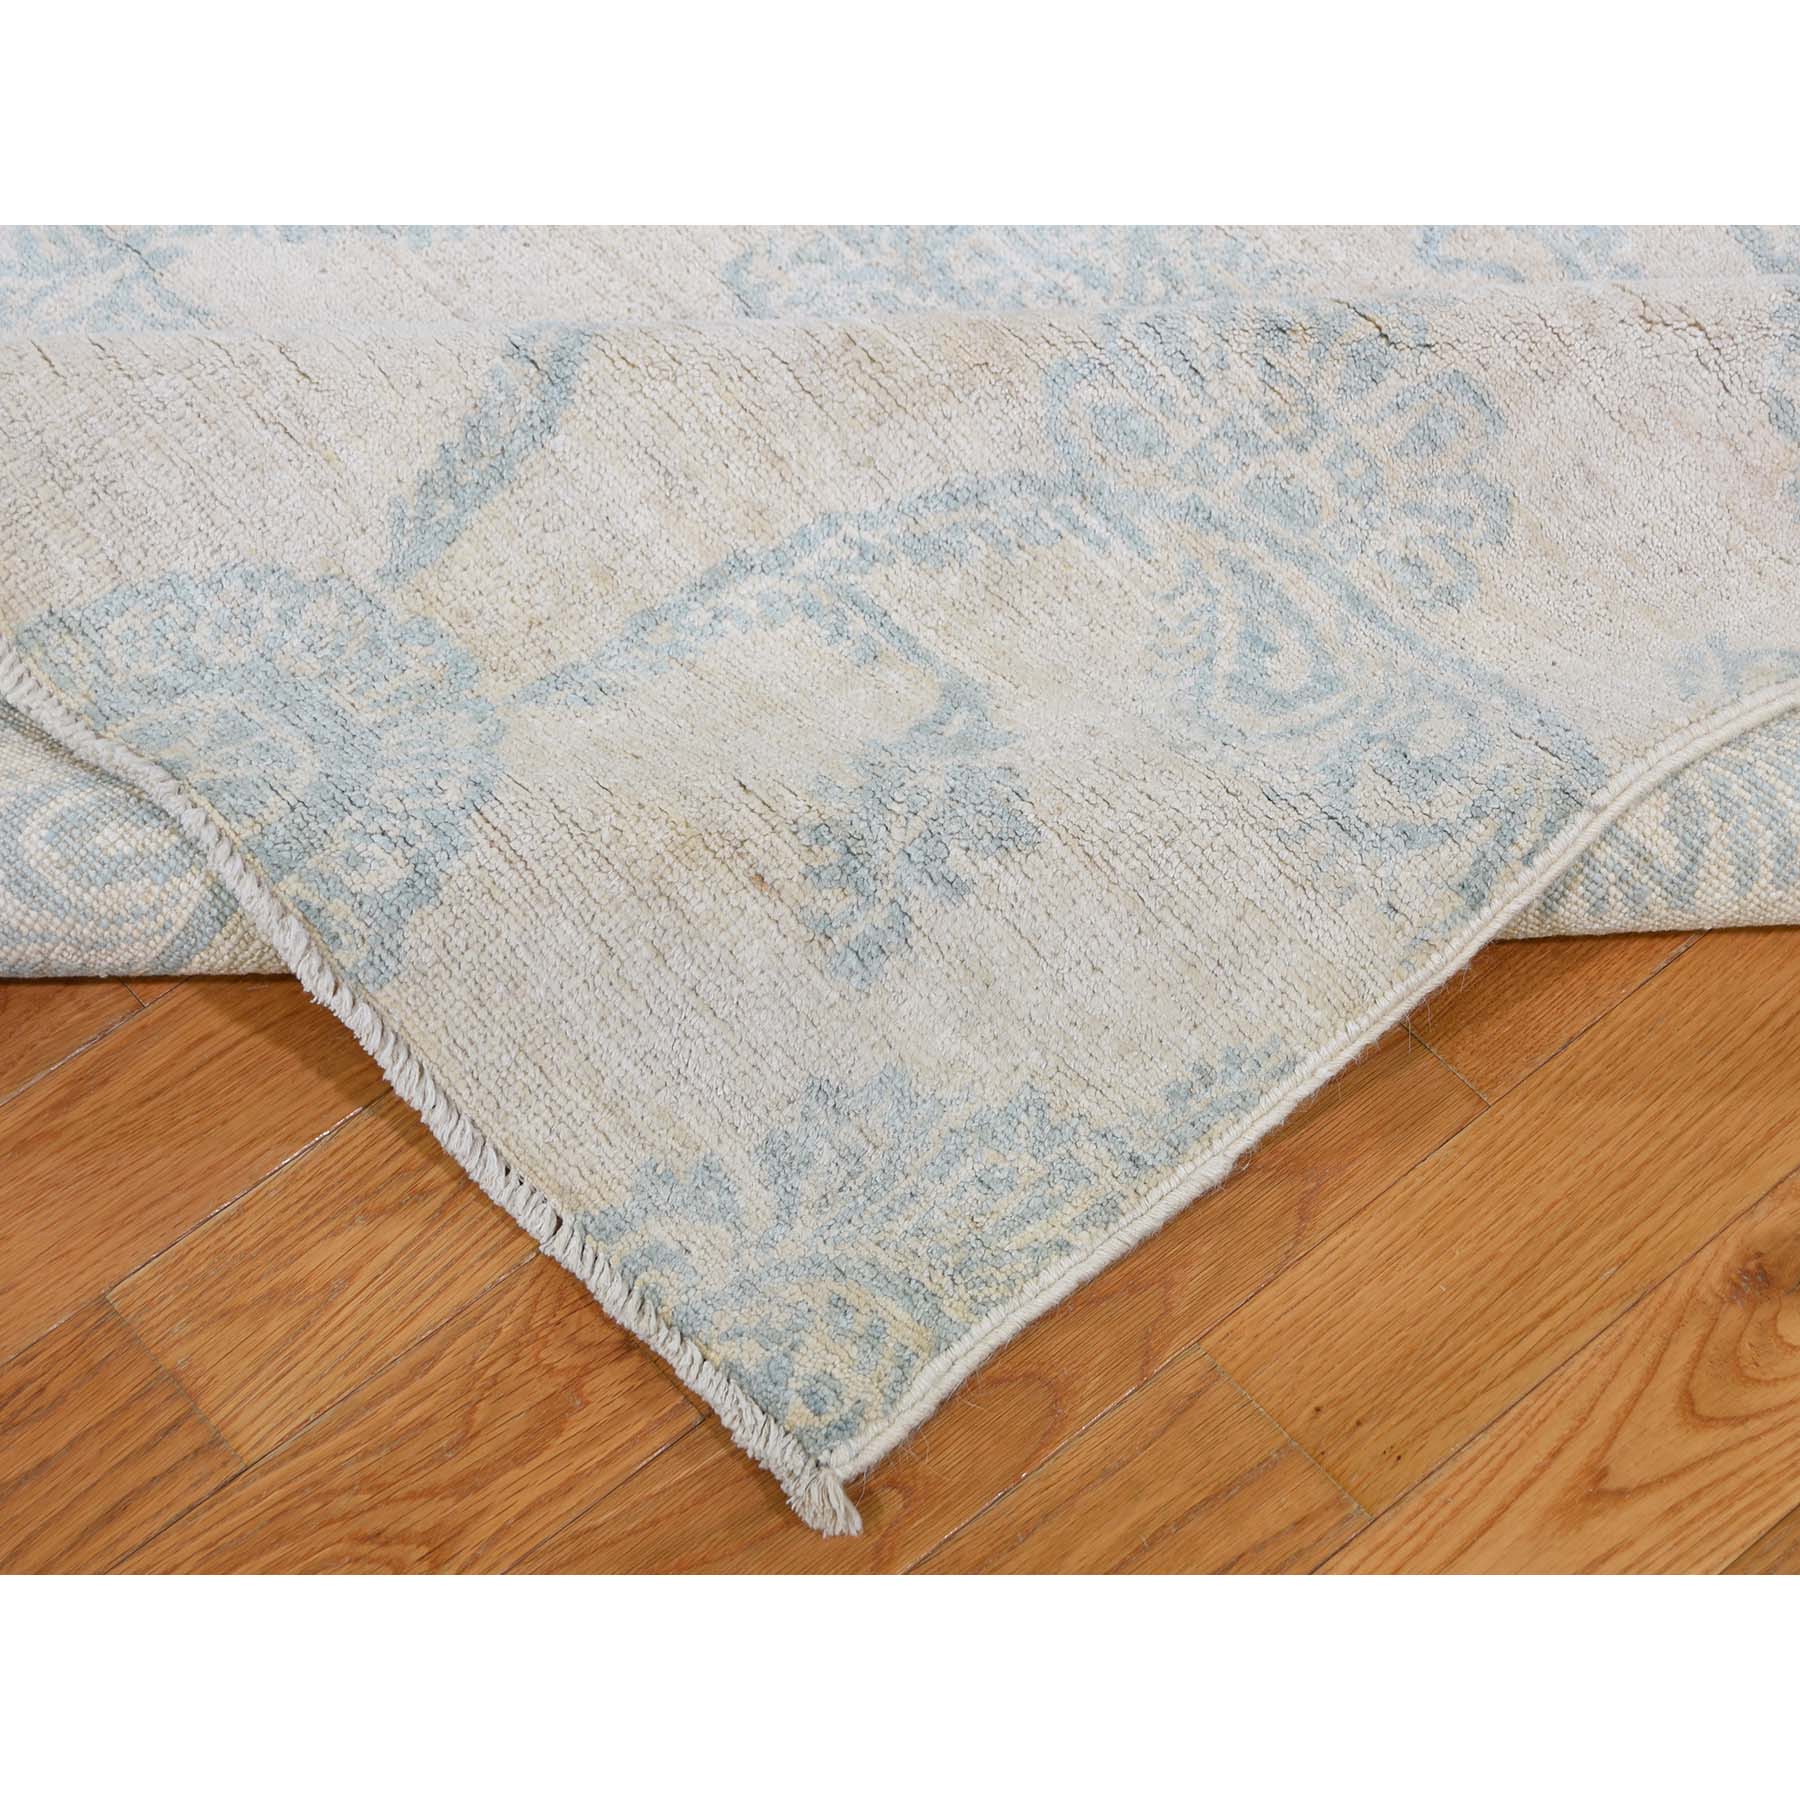 8-x10-1  Peshawar With Oushak Damask Design Pure Wool Hand-Knotted Oriental Rug 